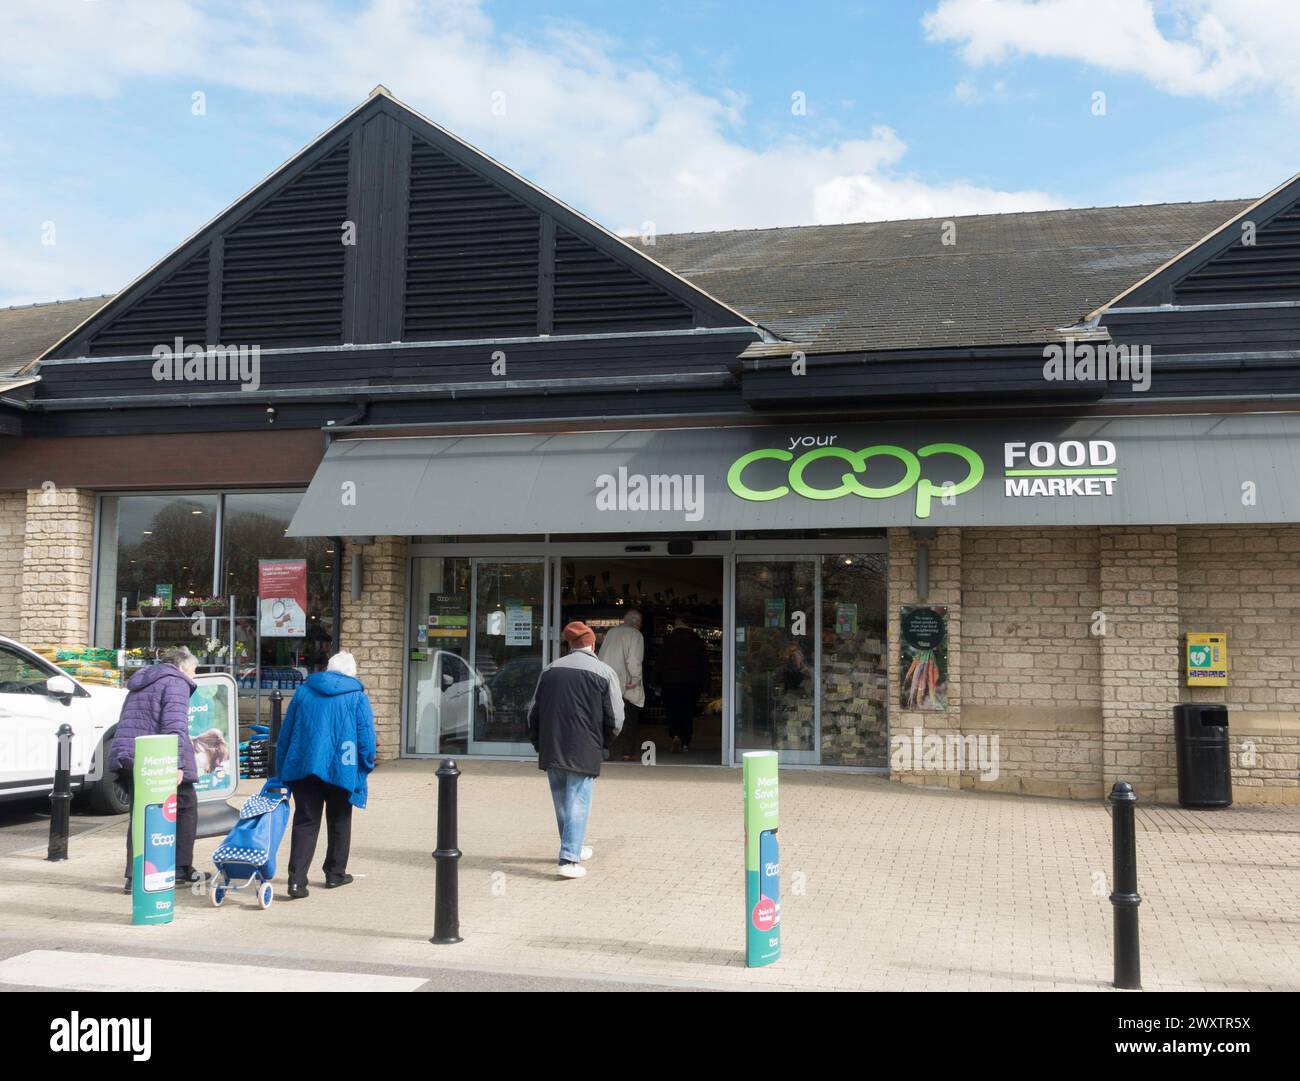 Shoppers entering the Co-op food market in Moreton in Marsh, Gloucestershire, England, UK Stock Photo